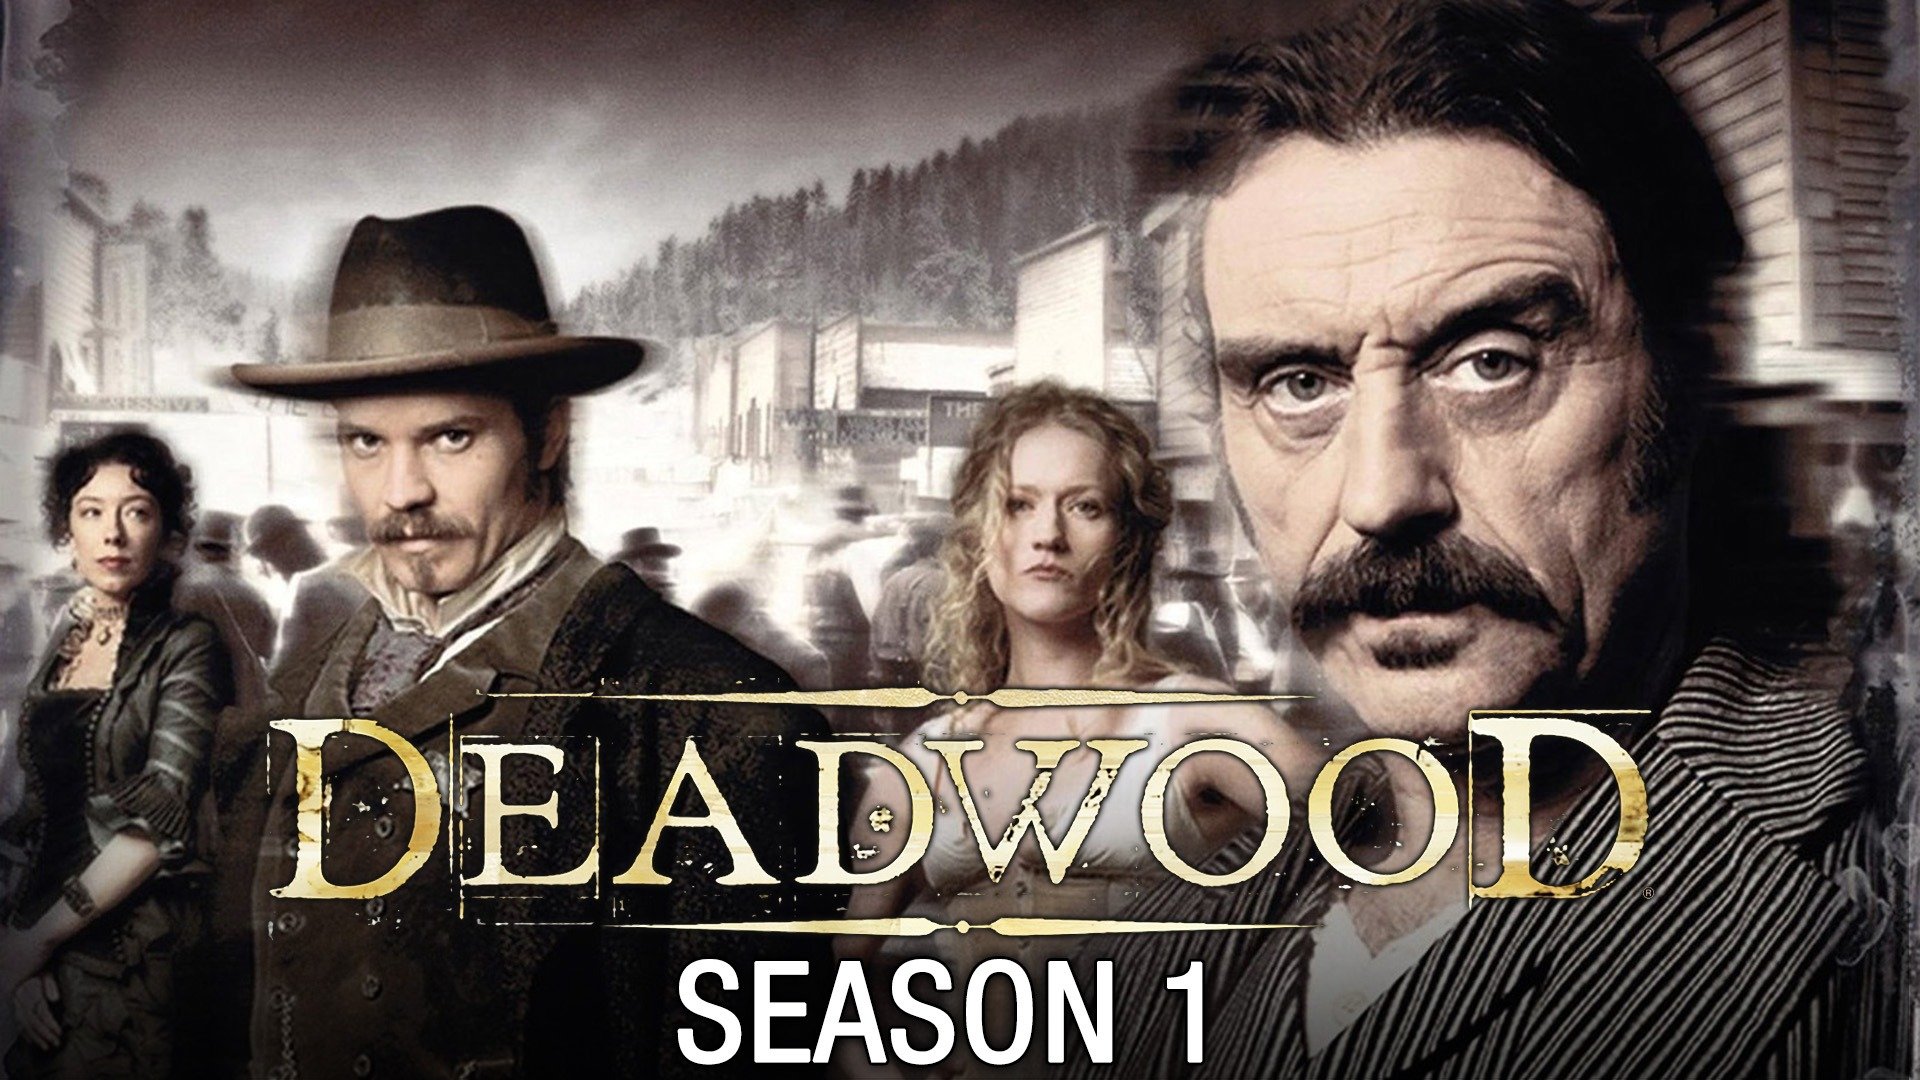 How To Watch Deadwood Series For Sale, Save 66 jlcatj.gob.mx